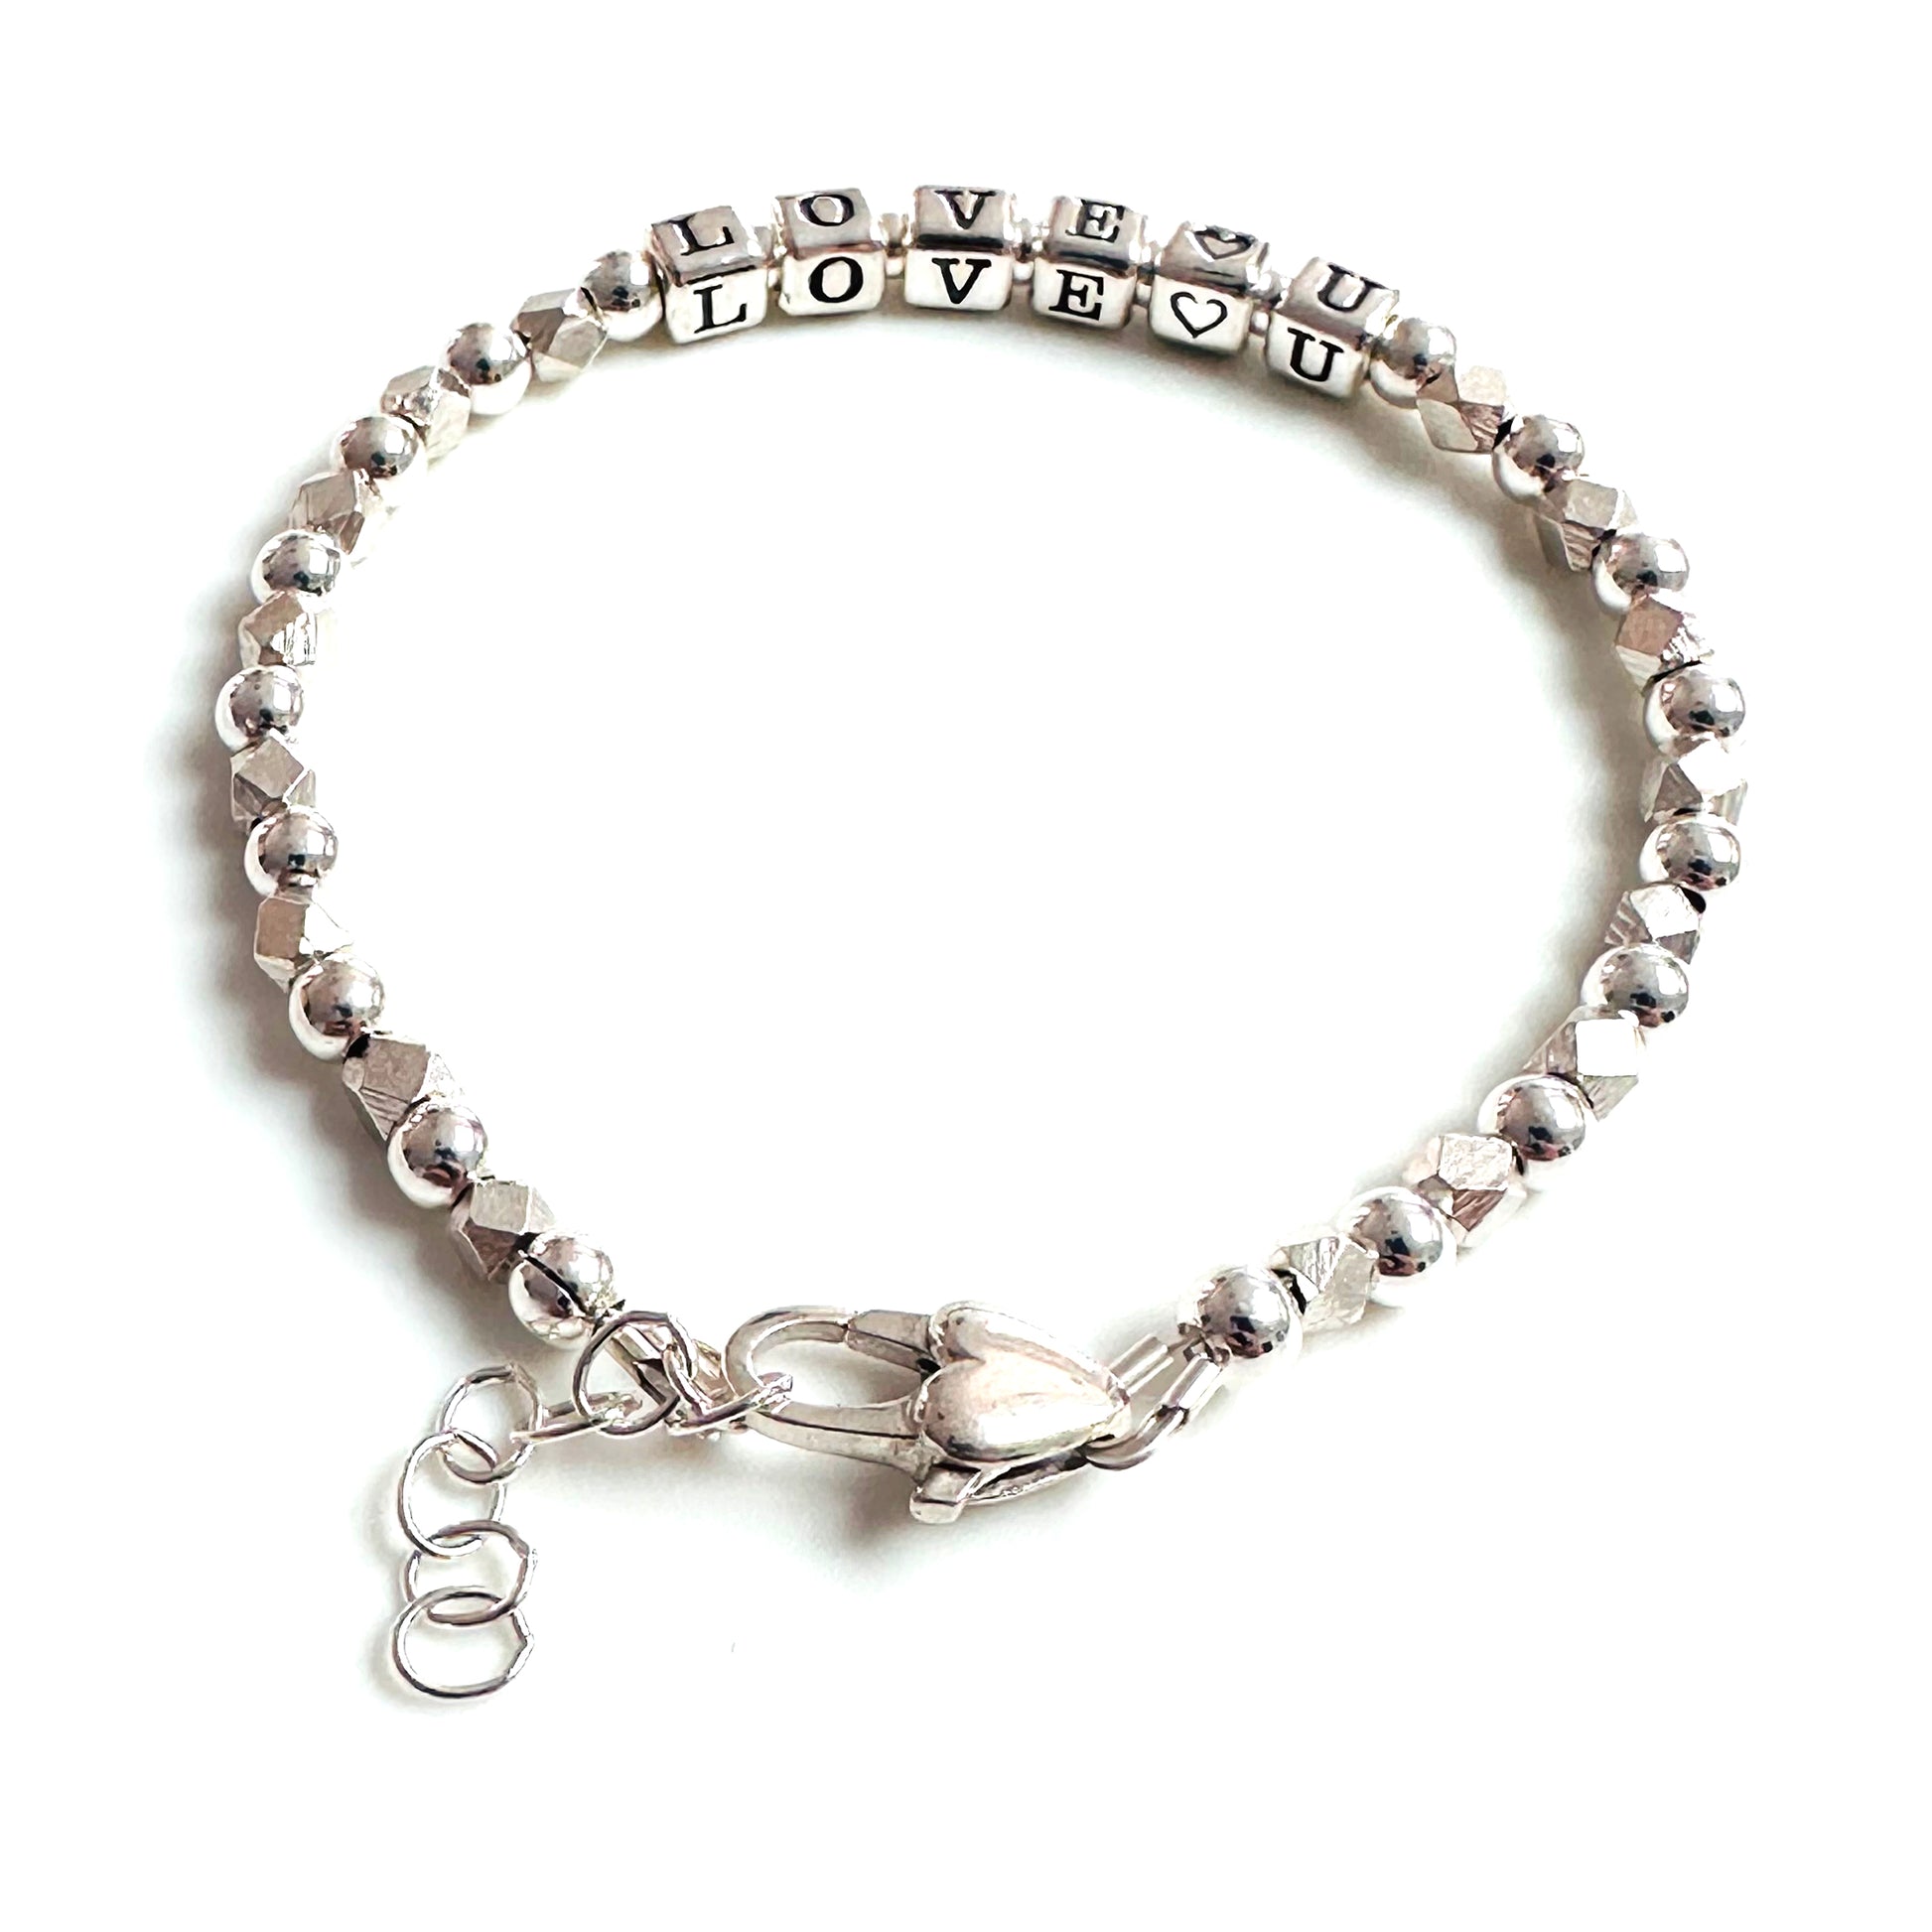 I Love You Sterling Silver Valentines Bracelet with heart shaped clasp